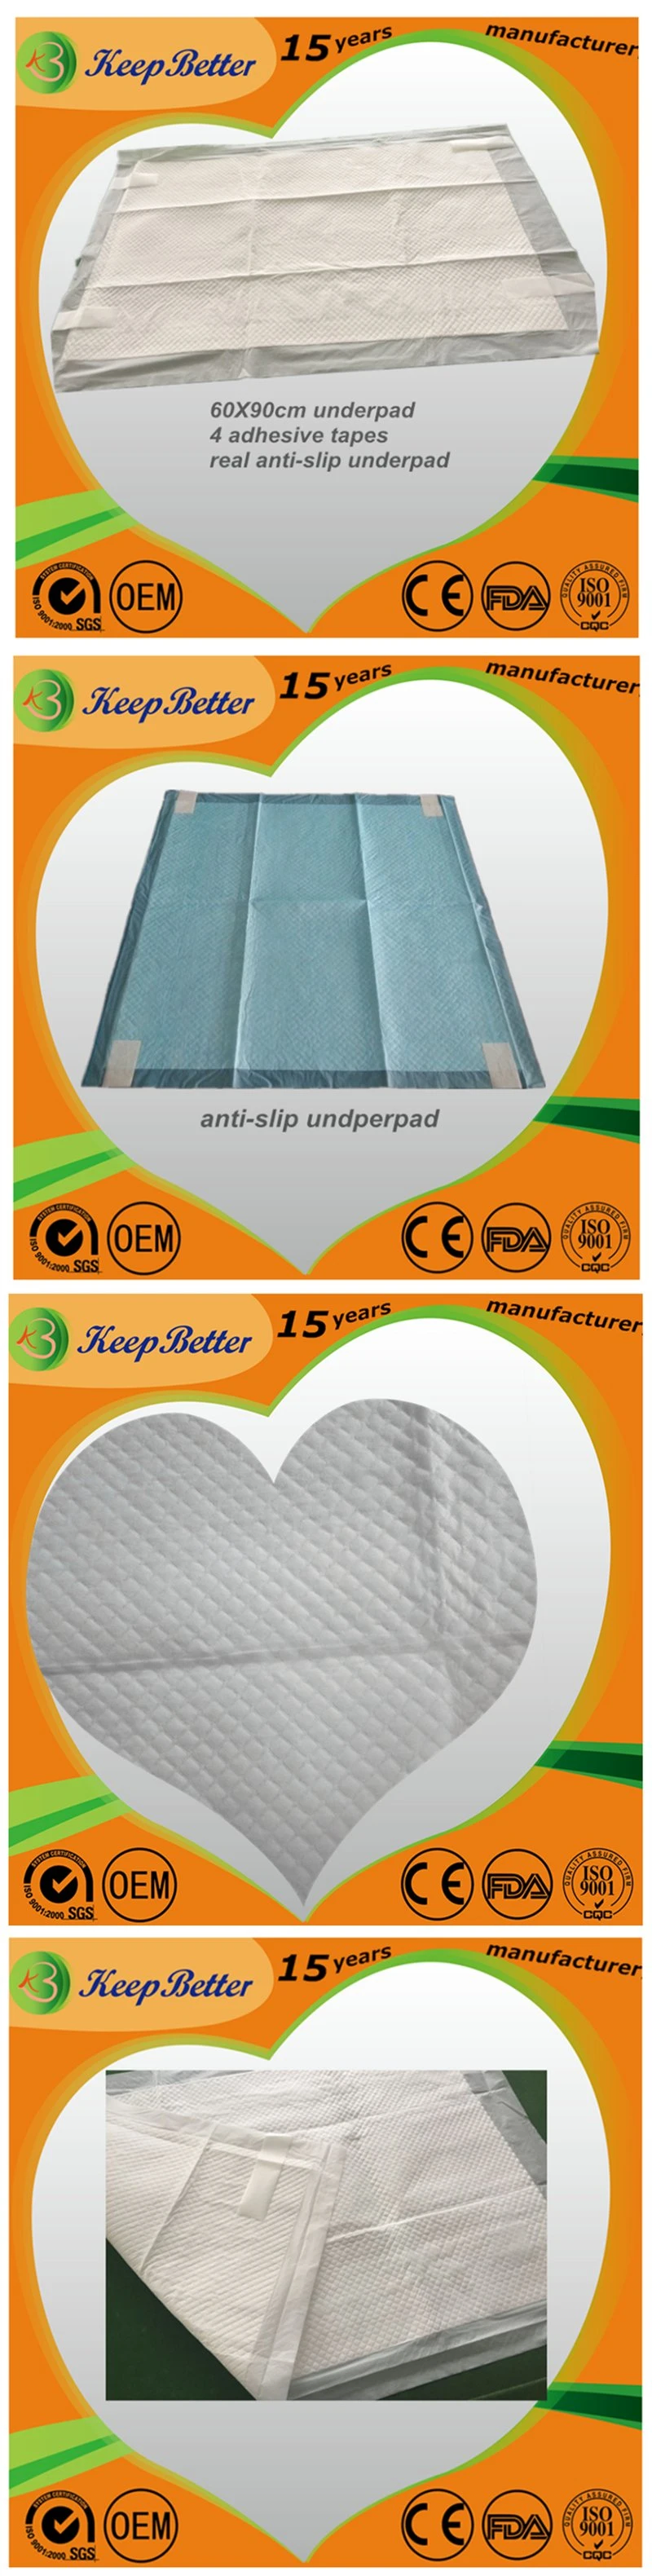 CE Disposable Incontinence Mattress Protector Chucks Underpads/Chux Pads/Bed Wetting Pads/Bed Mats/Adult Nursing Under Pads for Adults Elderly Incontinence Bed